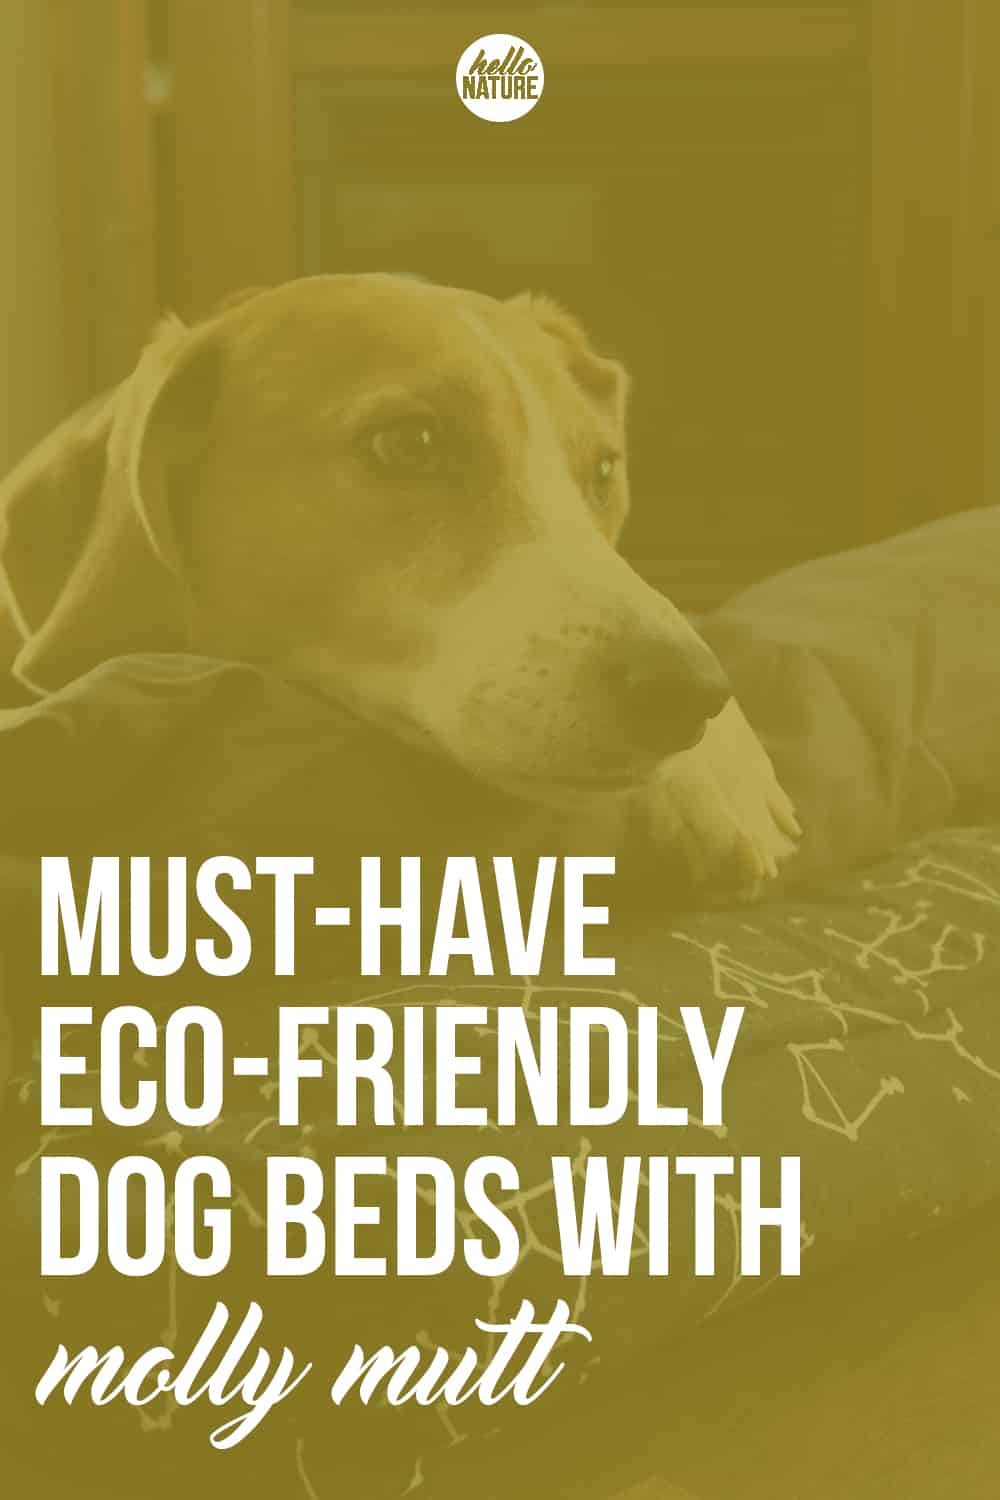 Looking to go green with your pooch? You need to check out Molly Mutt dog products. Your furry friends (and the environment) will thank you!